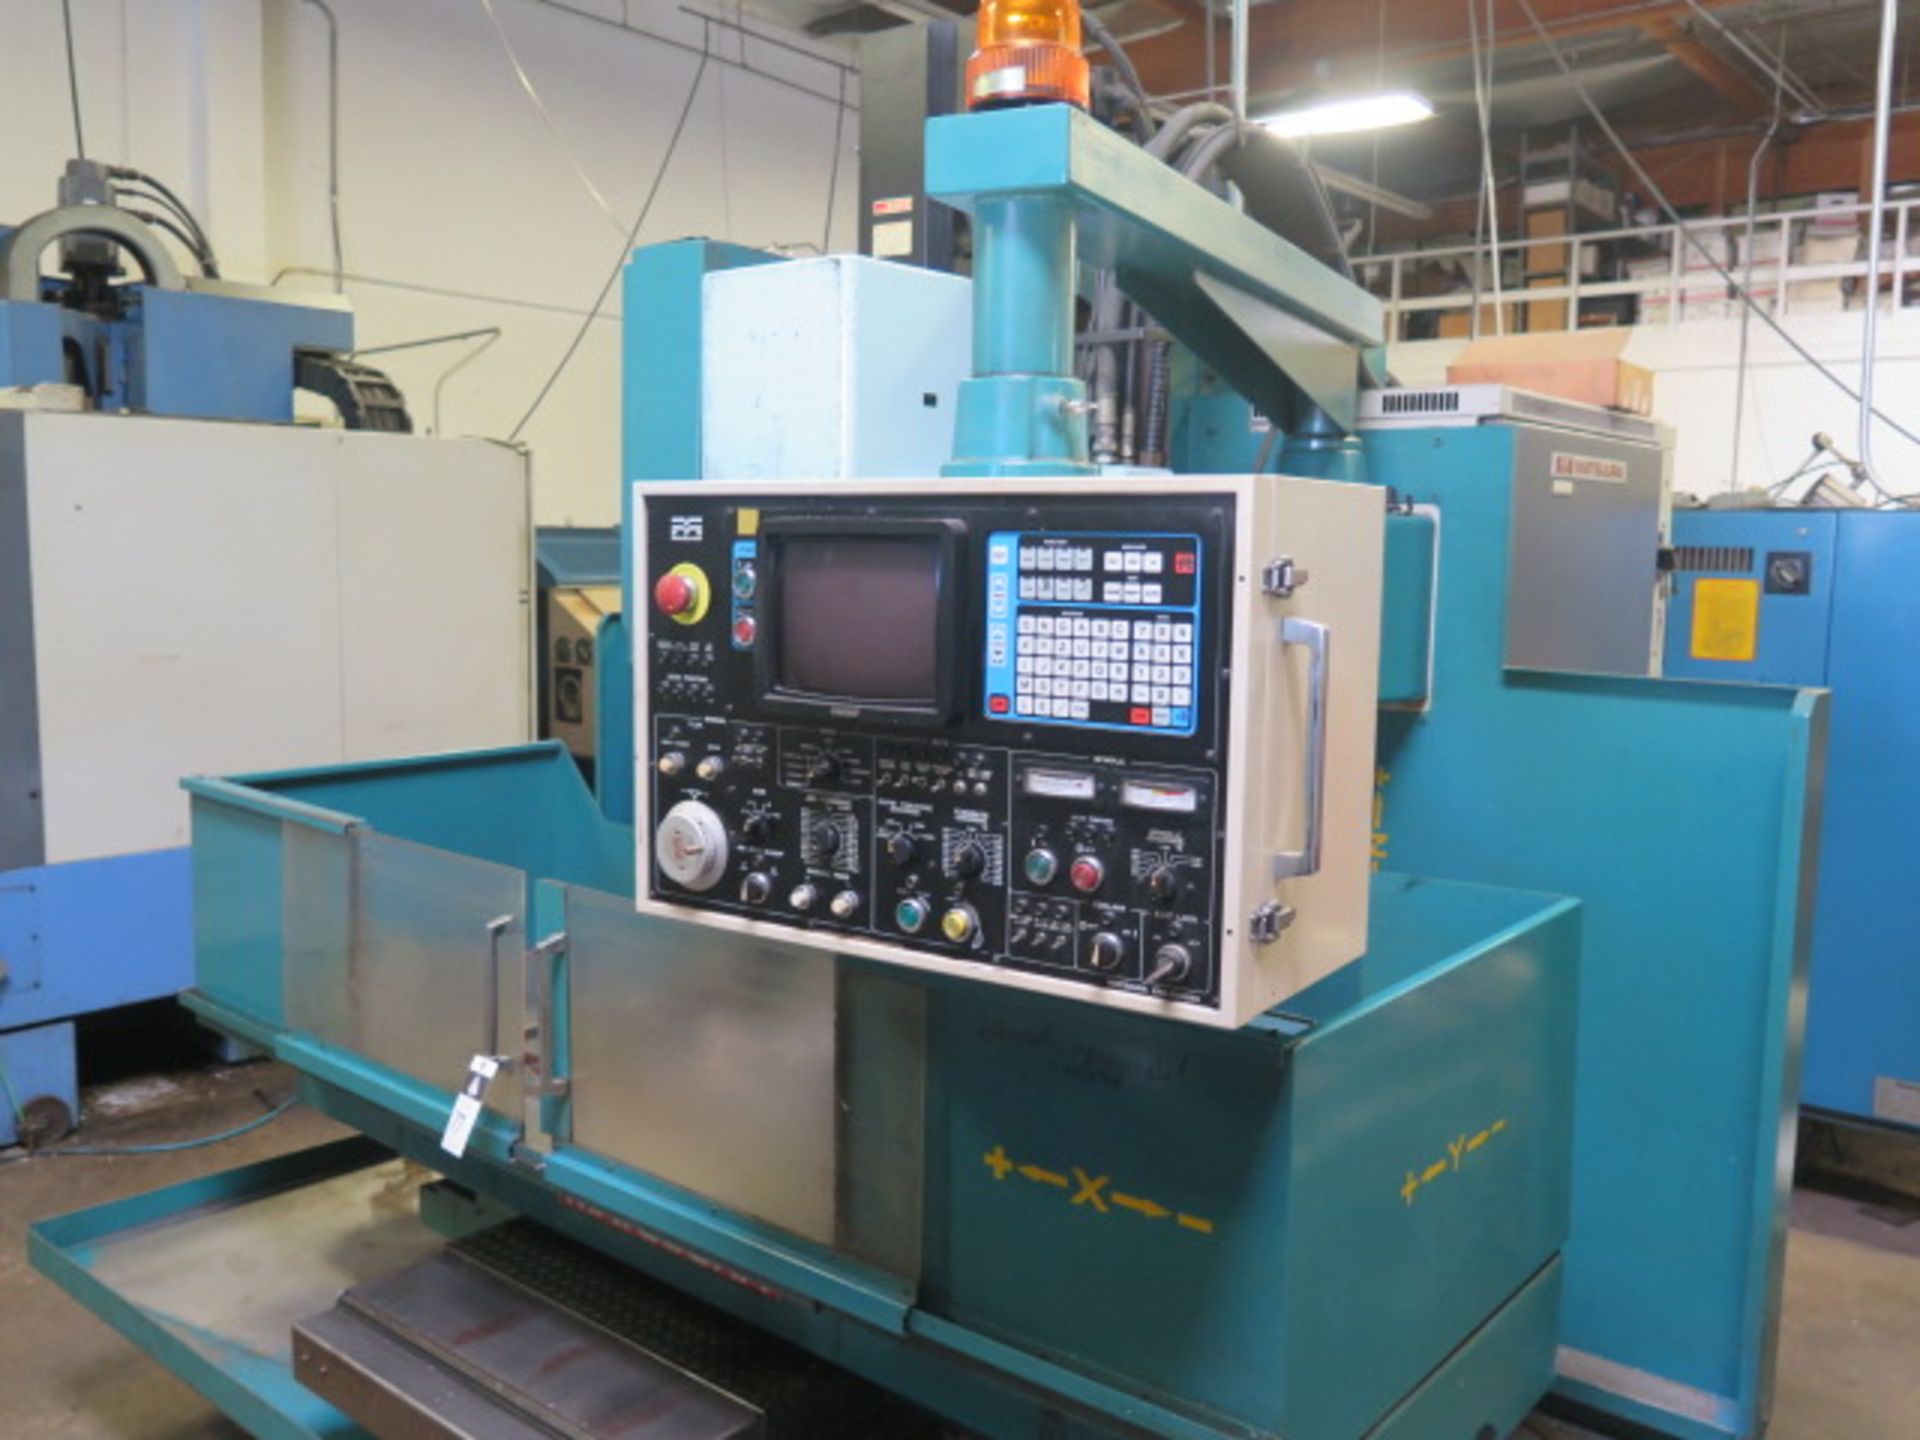 Matsuura MC-760V CNC VMC s/n 85054941 w/ Yasnac MX2 Controls, 30-Station, SOLD AS IS - Image 3 of 11